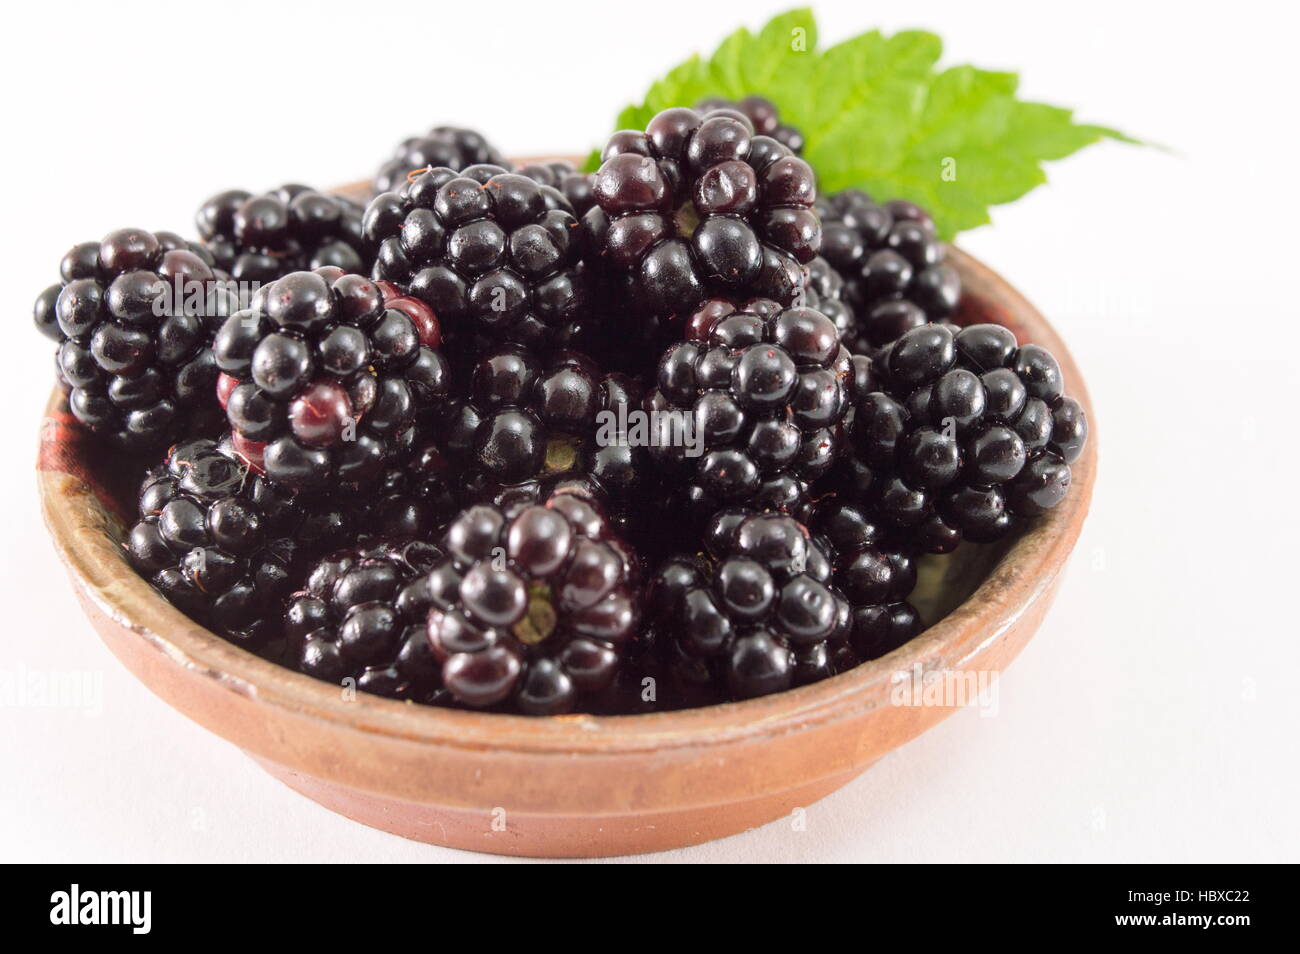 bunch of fresh juicy blackberries on a plate isolated Stock Photo